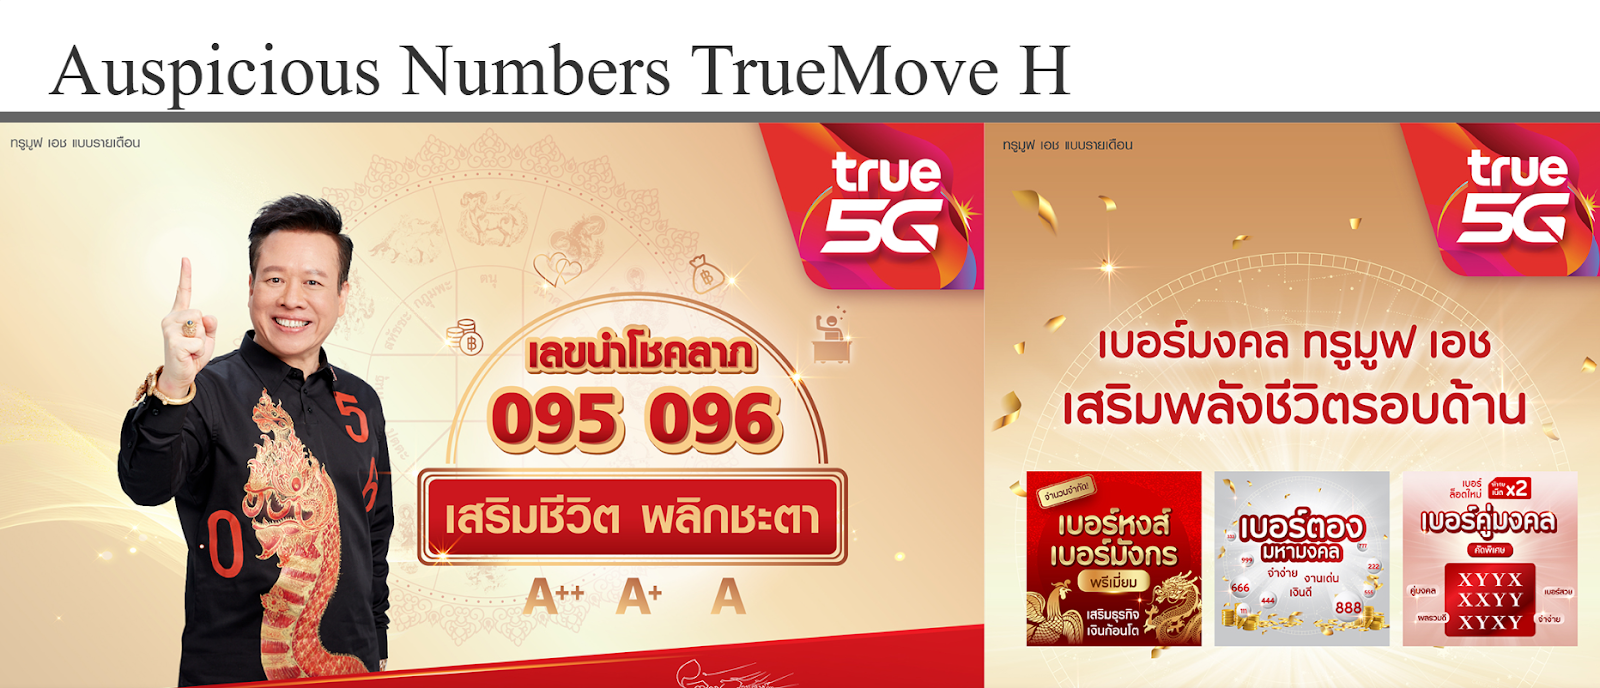 TrueMove H website snapshot highlighting the services it provides.